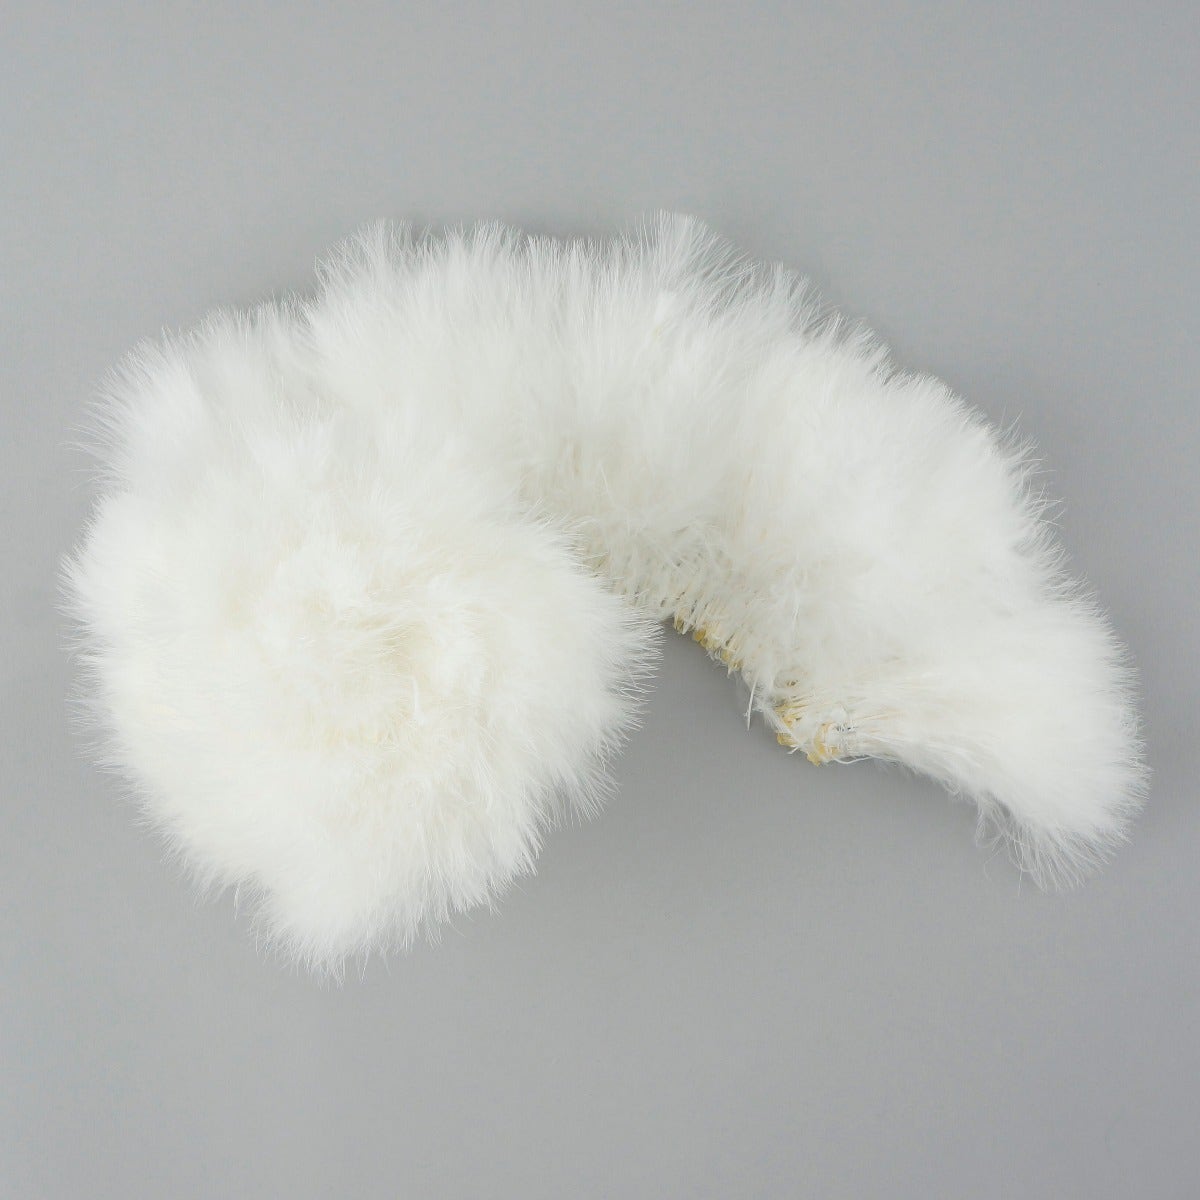 STRUNG TURKEY MARABOU BLOOD QUILL FEATHERS 3-4" - WHITE